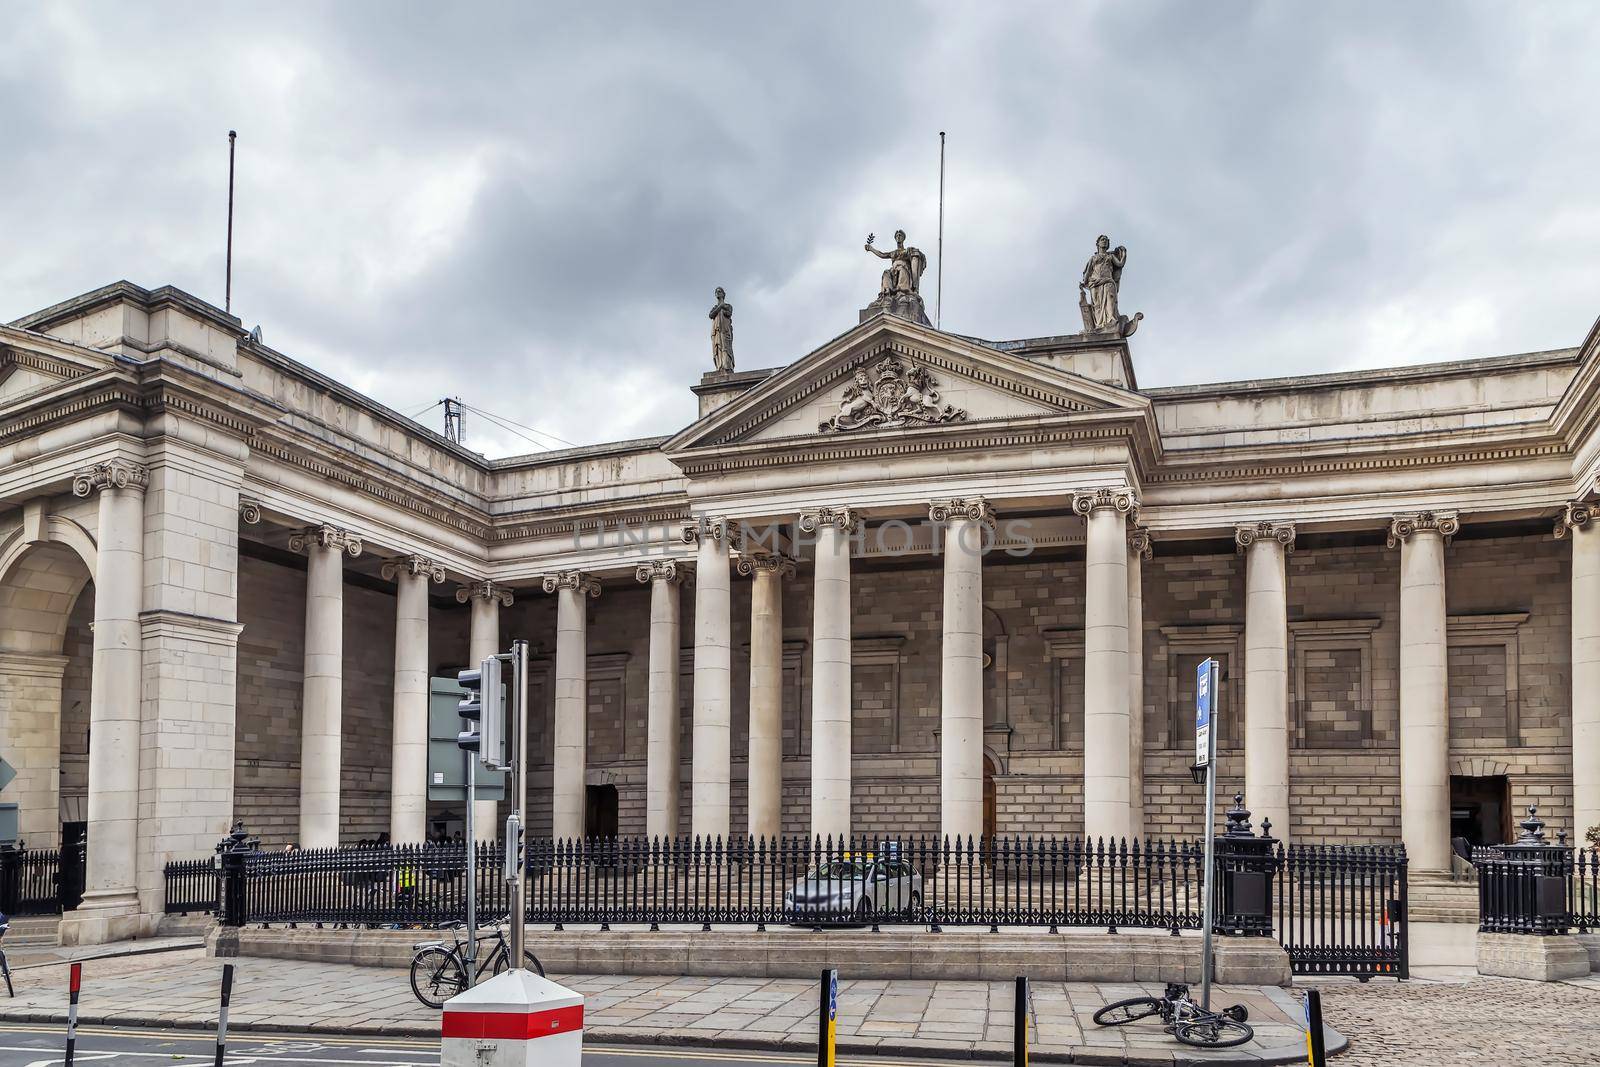 Parliament House in Dublin, Ireland, was home to the Parliament of Ireland, and later housed the Bank of Ireland.